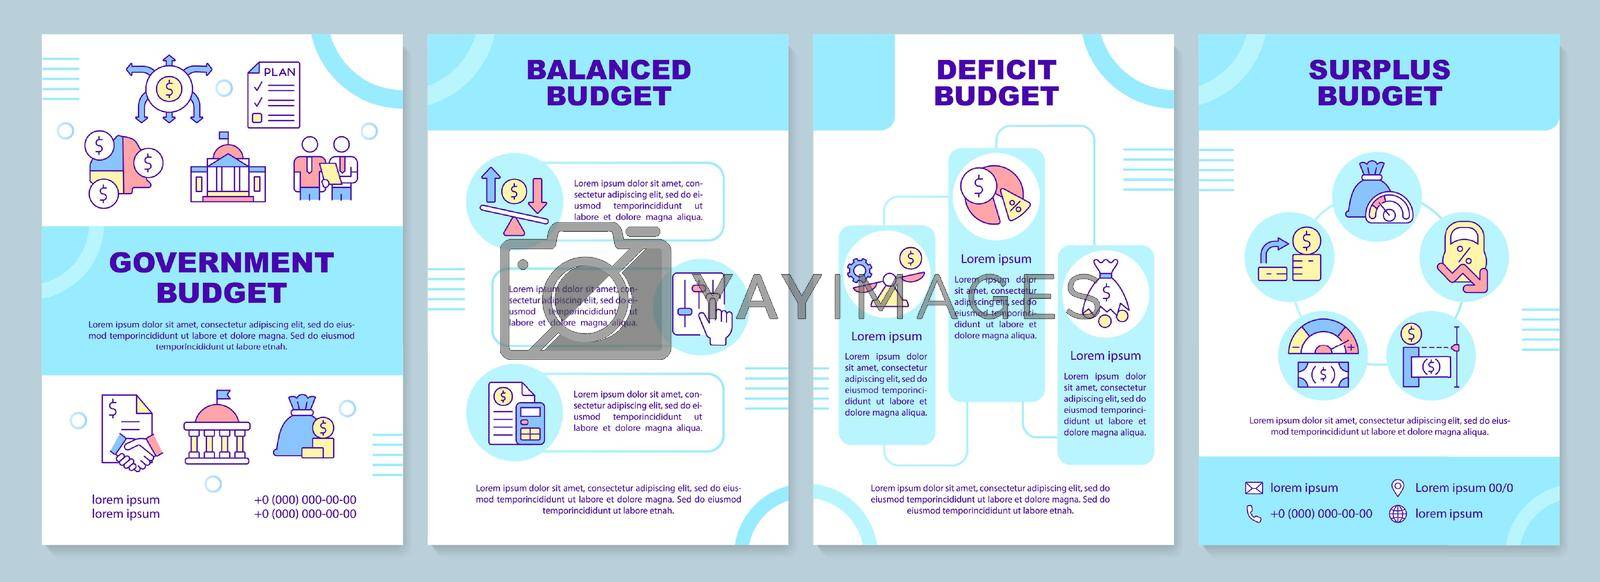 Royalty free image of Government budget types brochure template by bsd